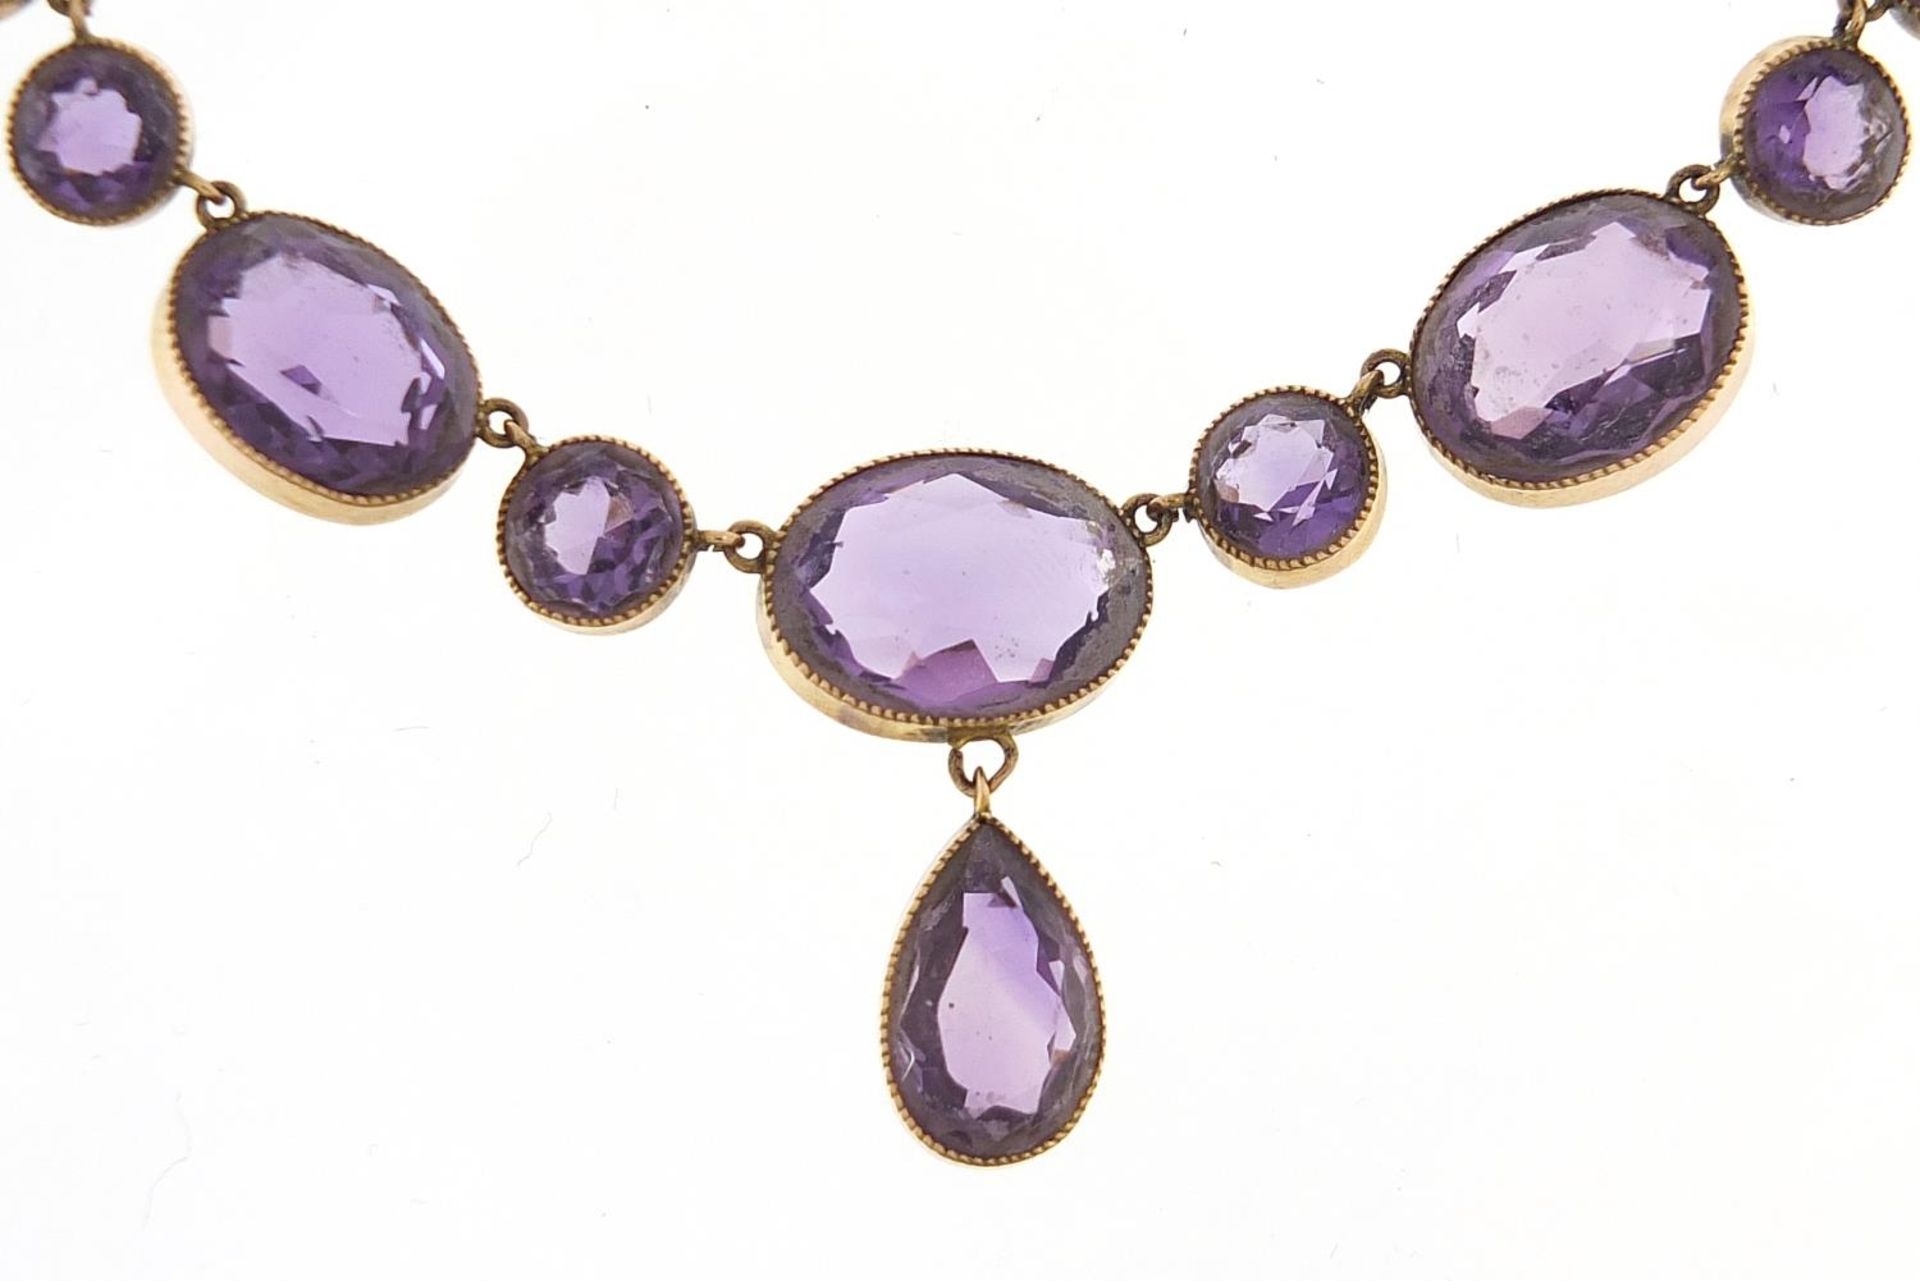 19th century unmarked gold amethyst necklace, 40cm in length, 13.5g